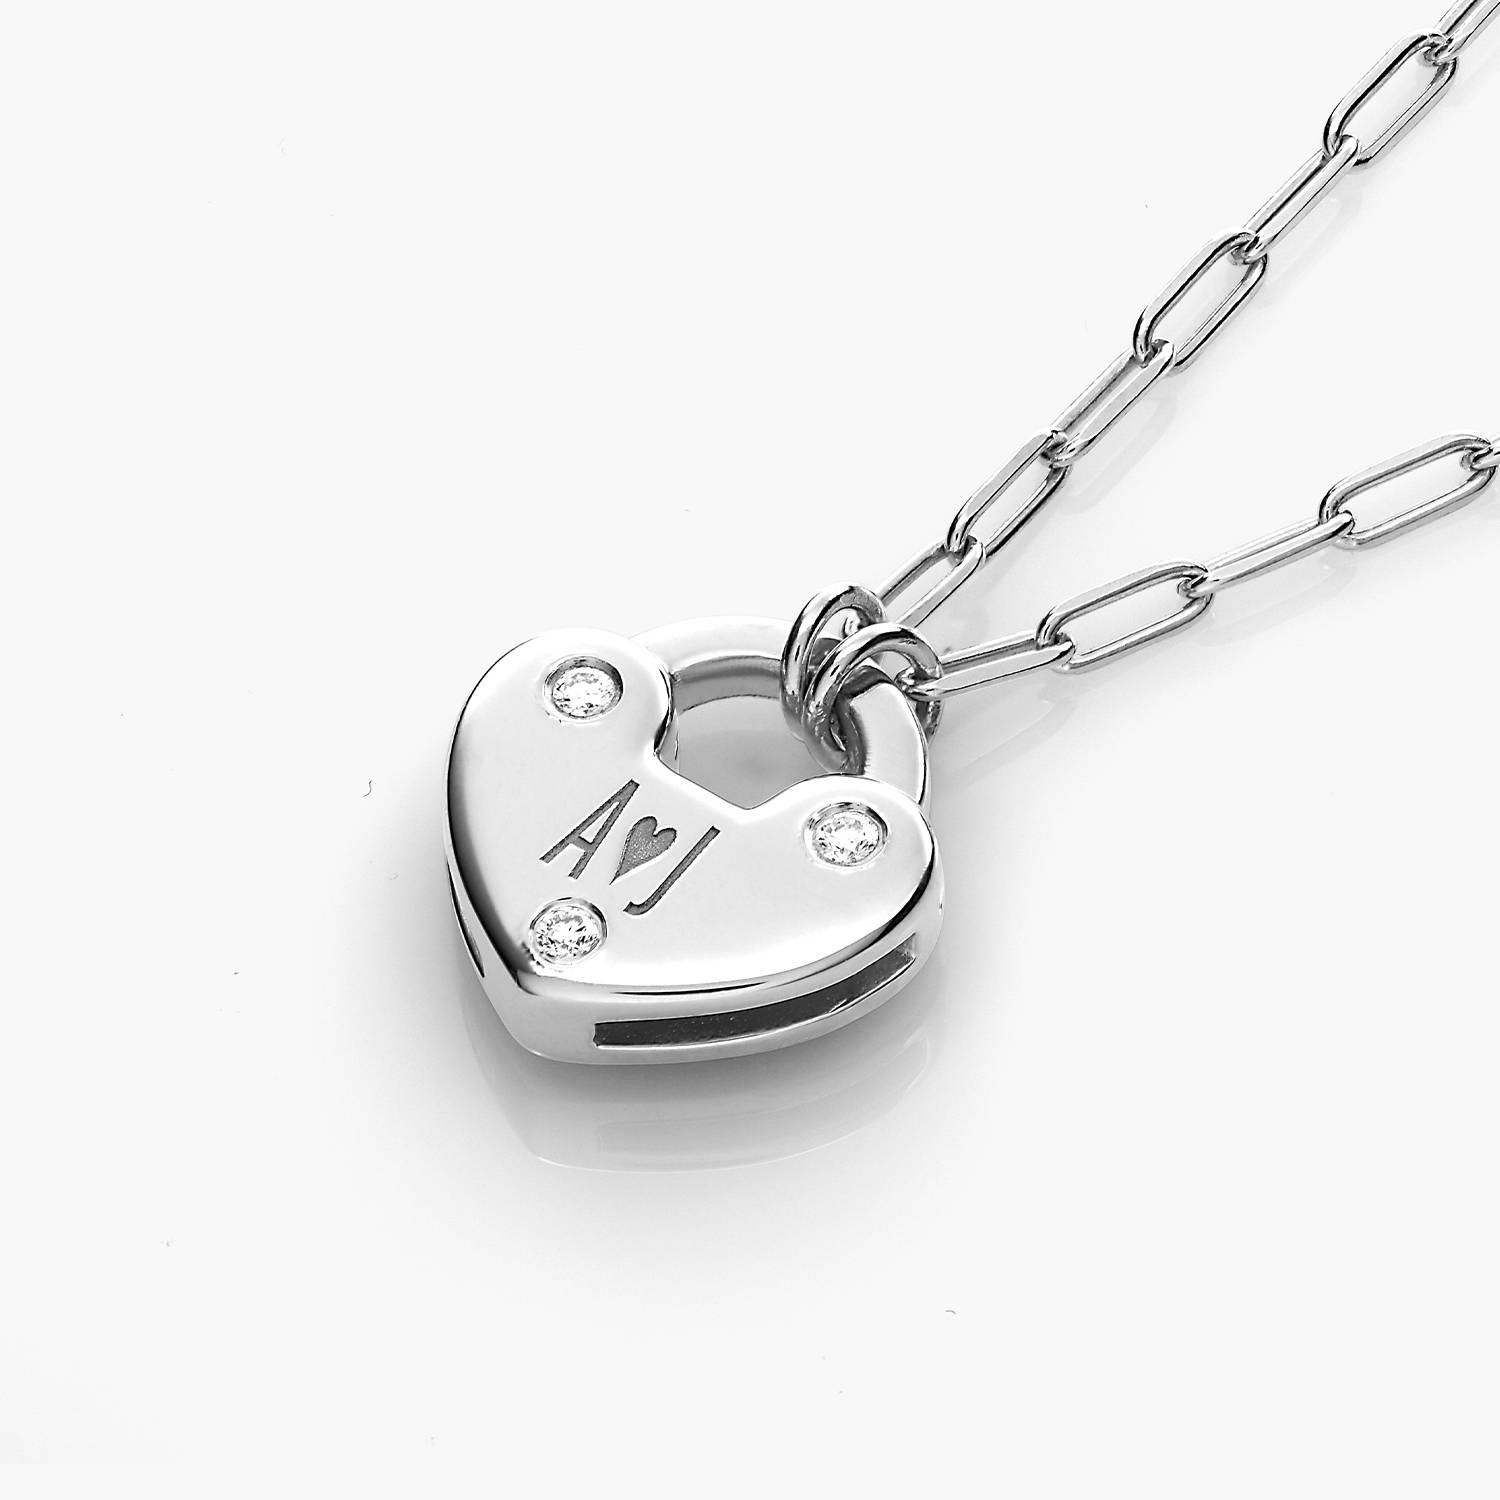 Heart Charm Lock Necklace With Diamonds - Silver product photo